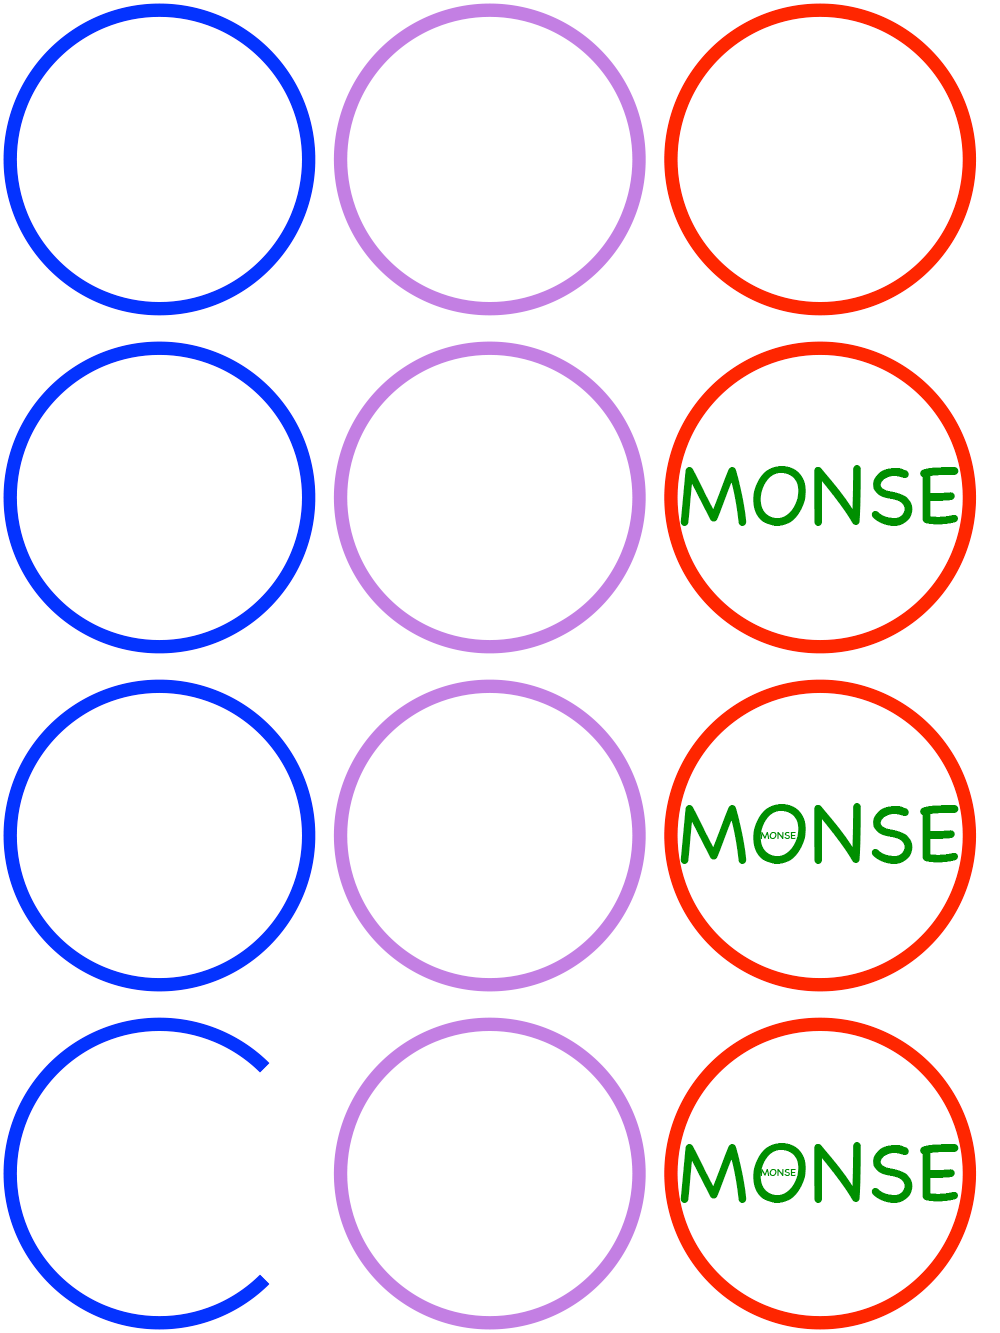 Four rows of circles, running blue, purple, and red left to right, with the circles altered as described below